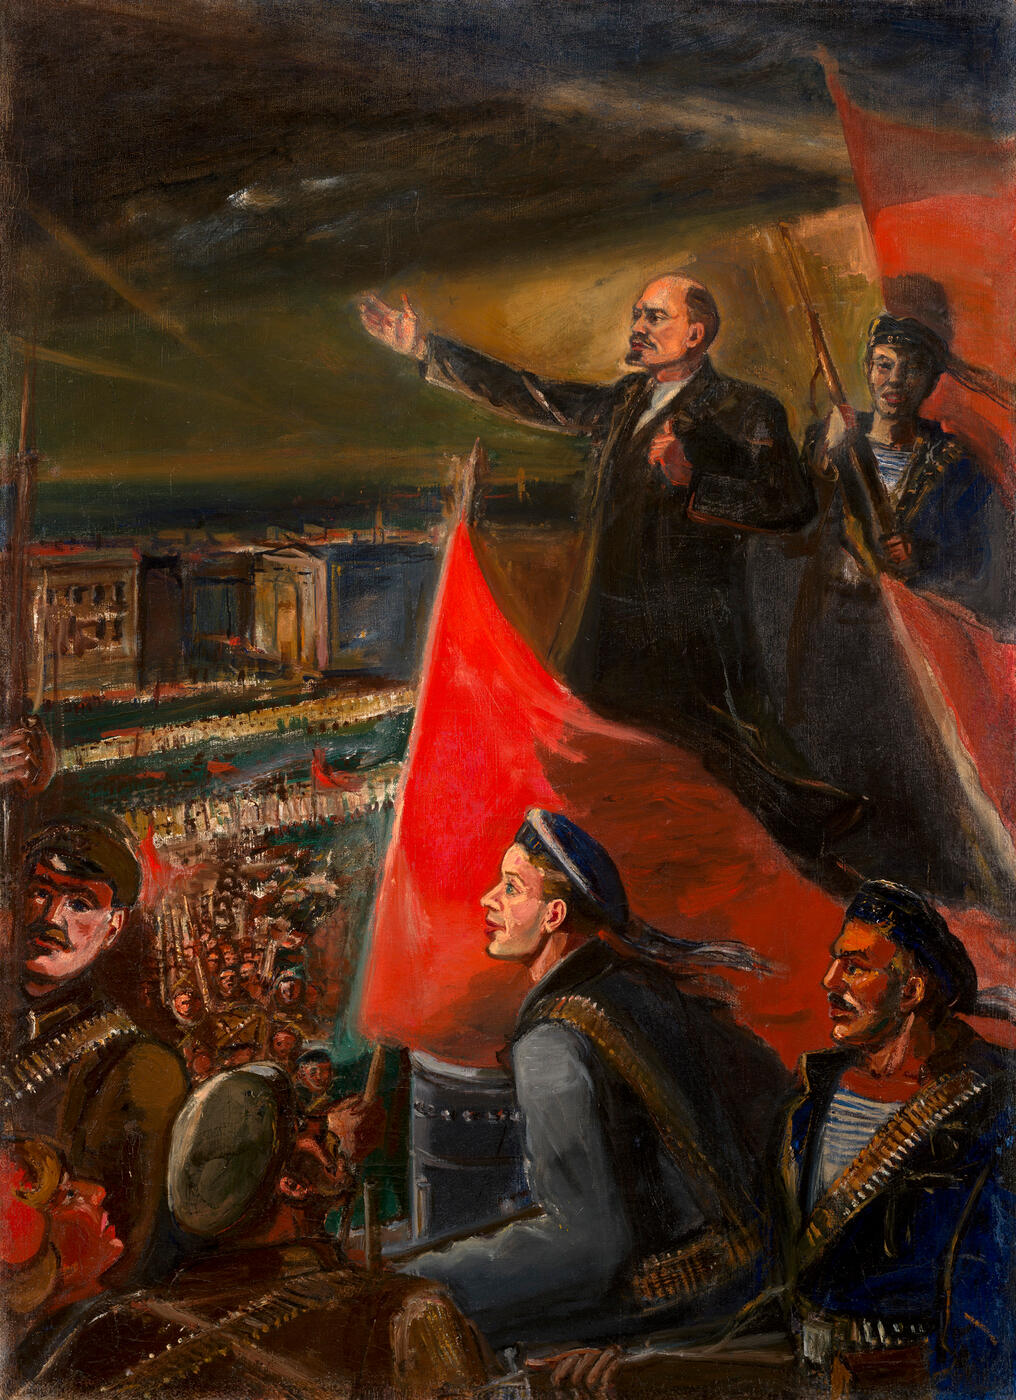 Lenin in October, from the series "October"